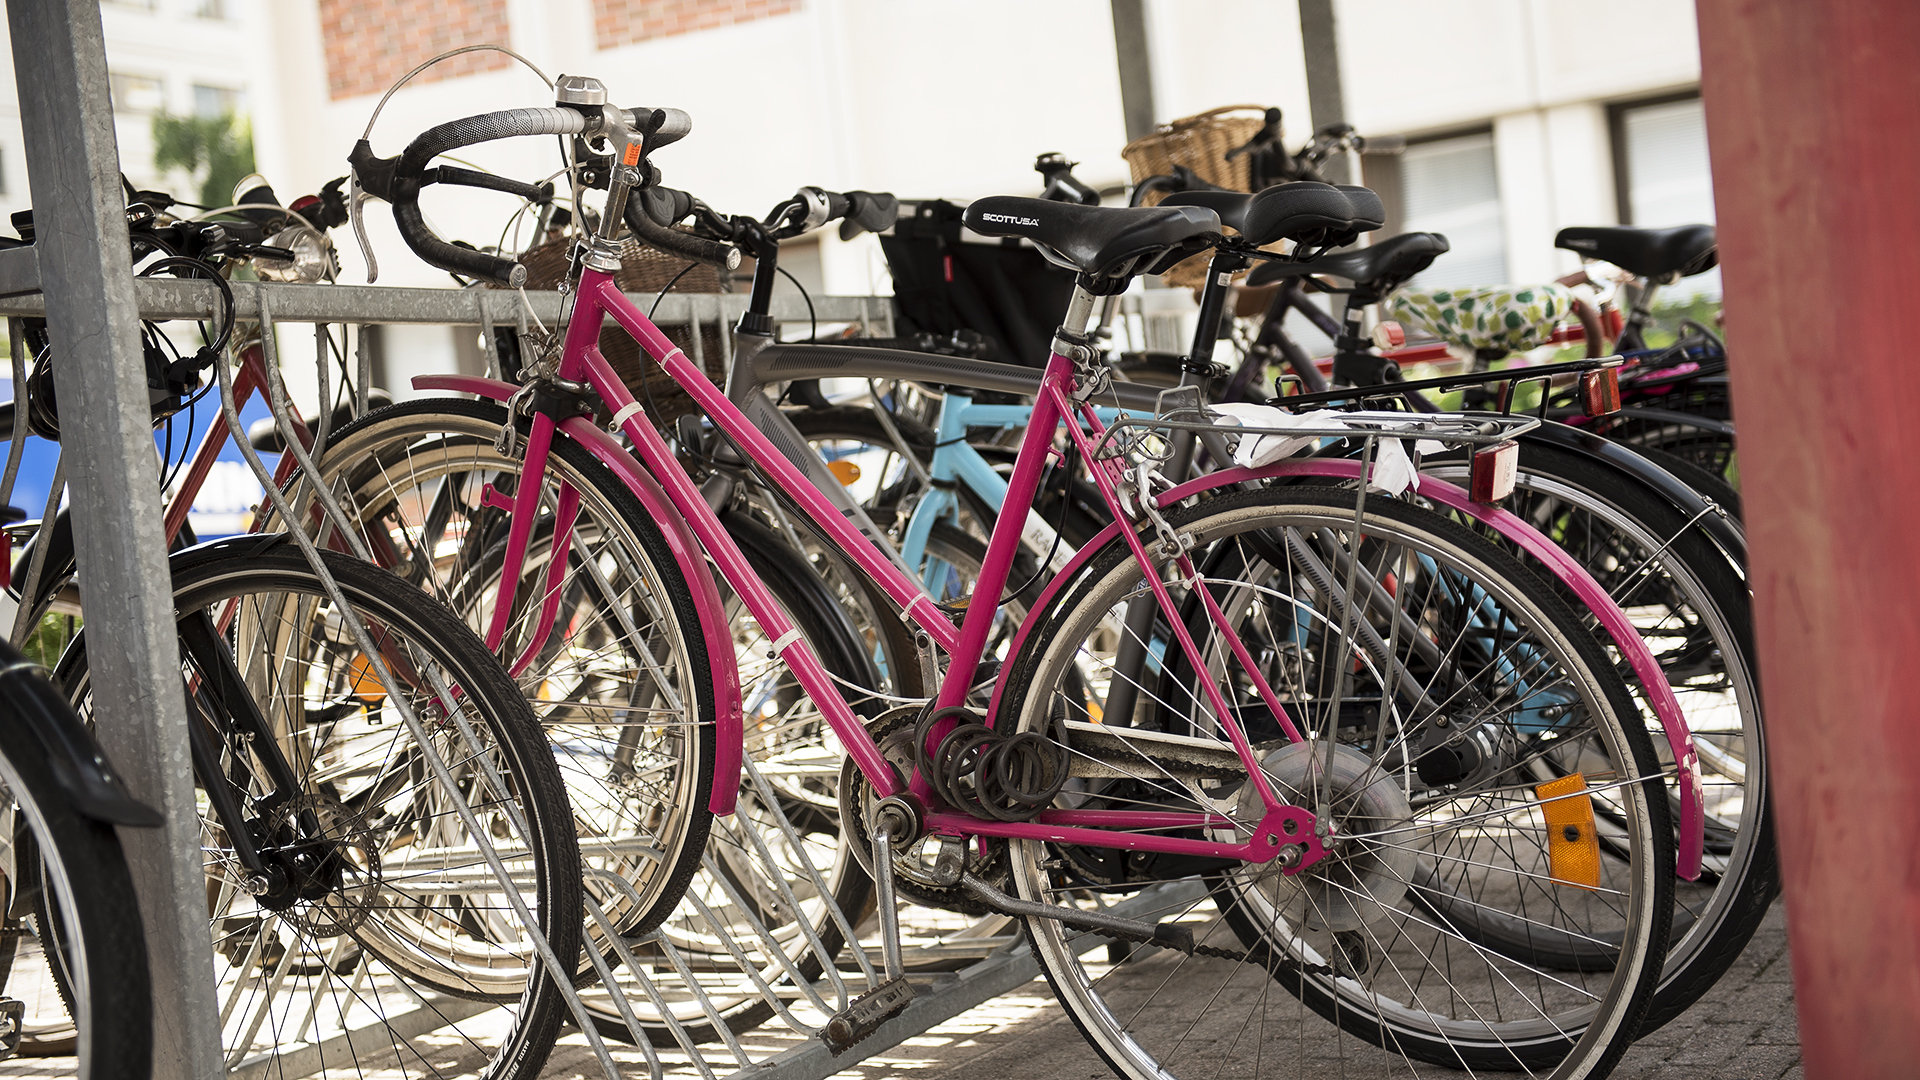 Police are investigating the black trade in bicycles